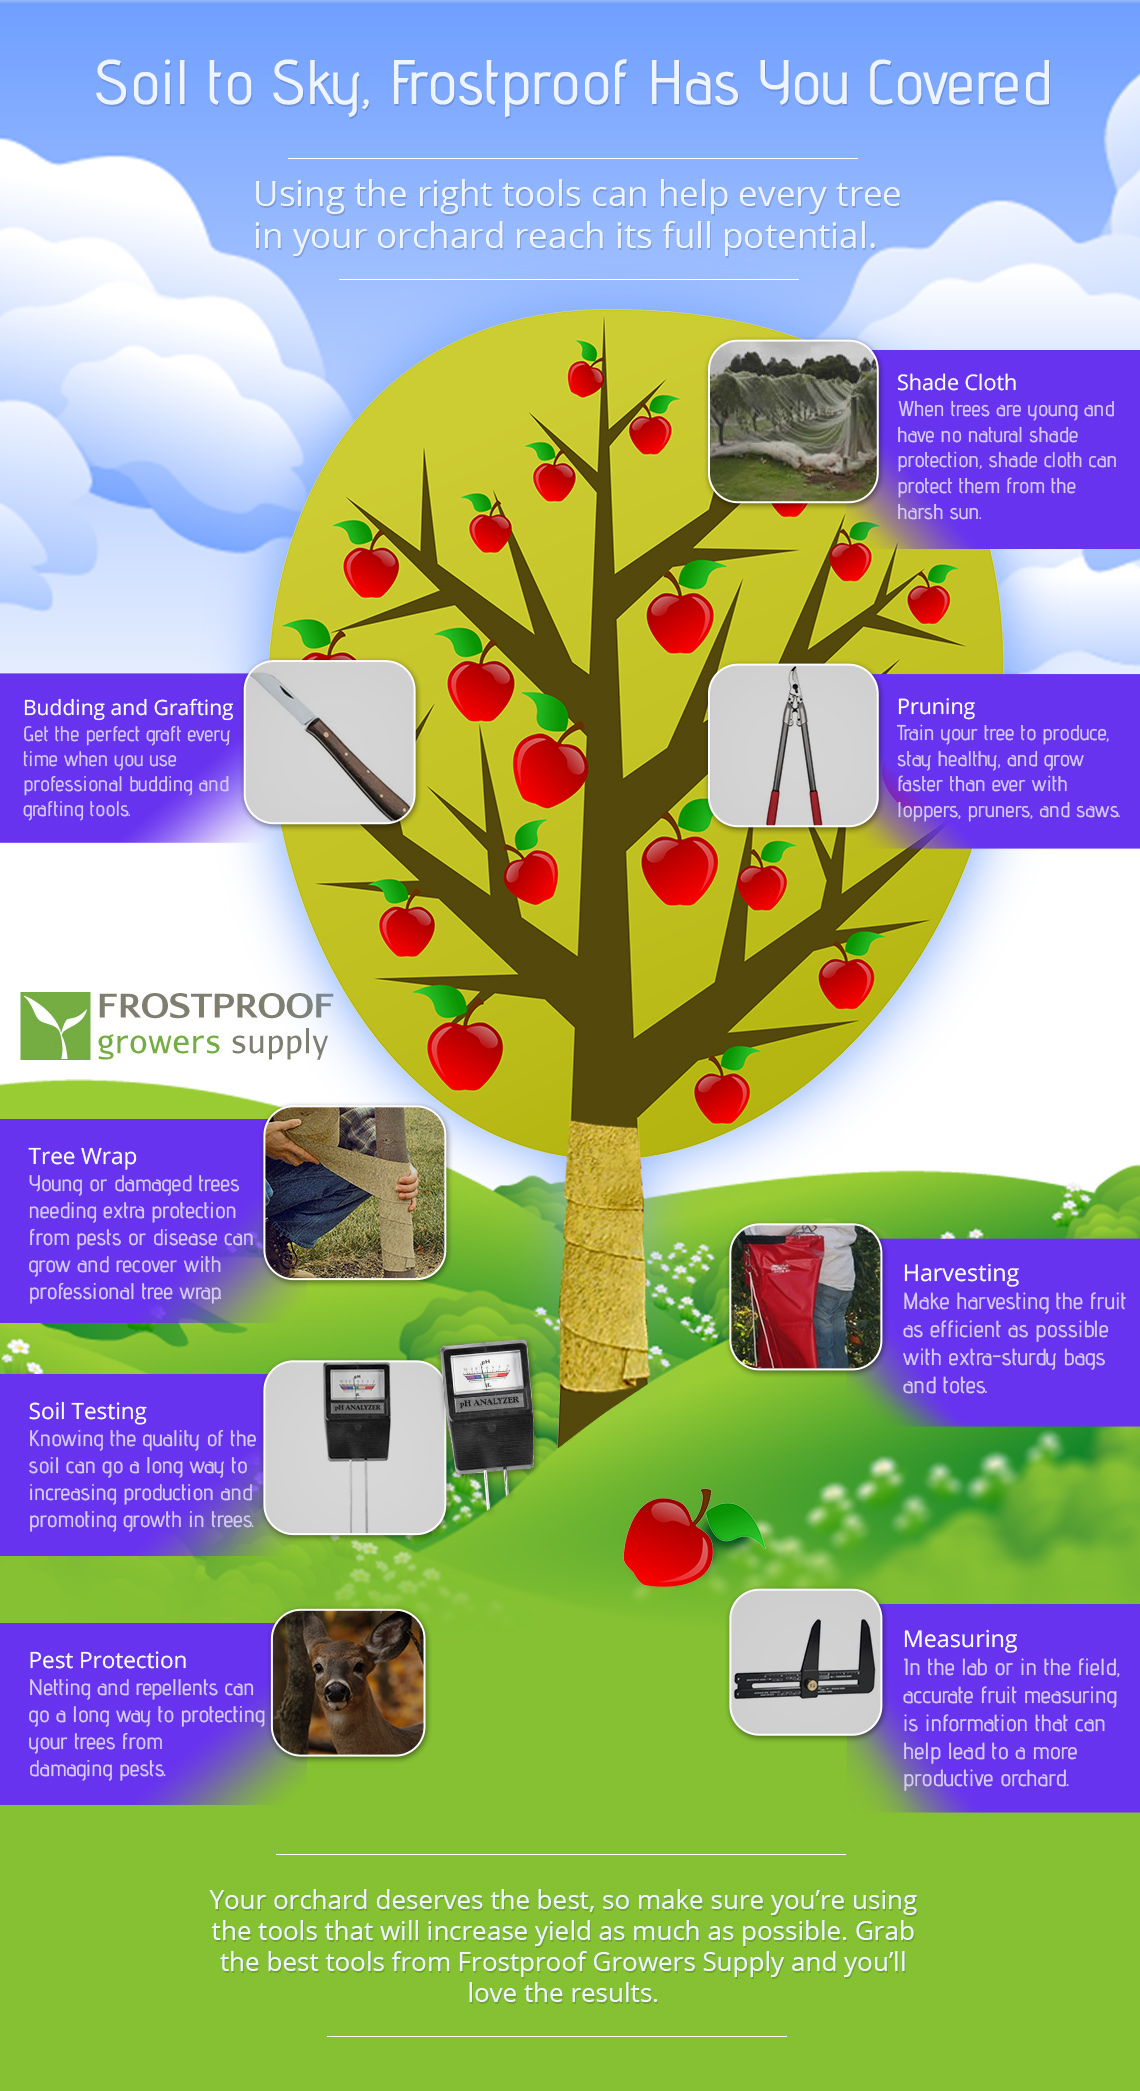 Infographic showing the orchard supply and growers supply products Frostproof offers.